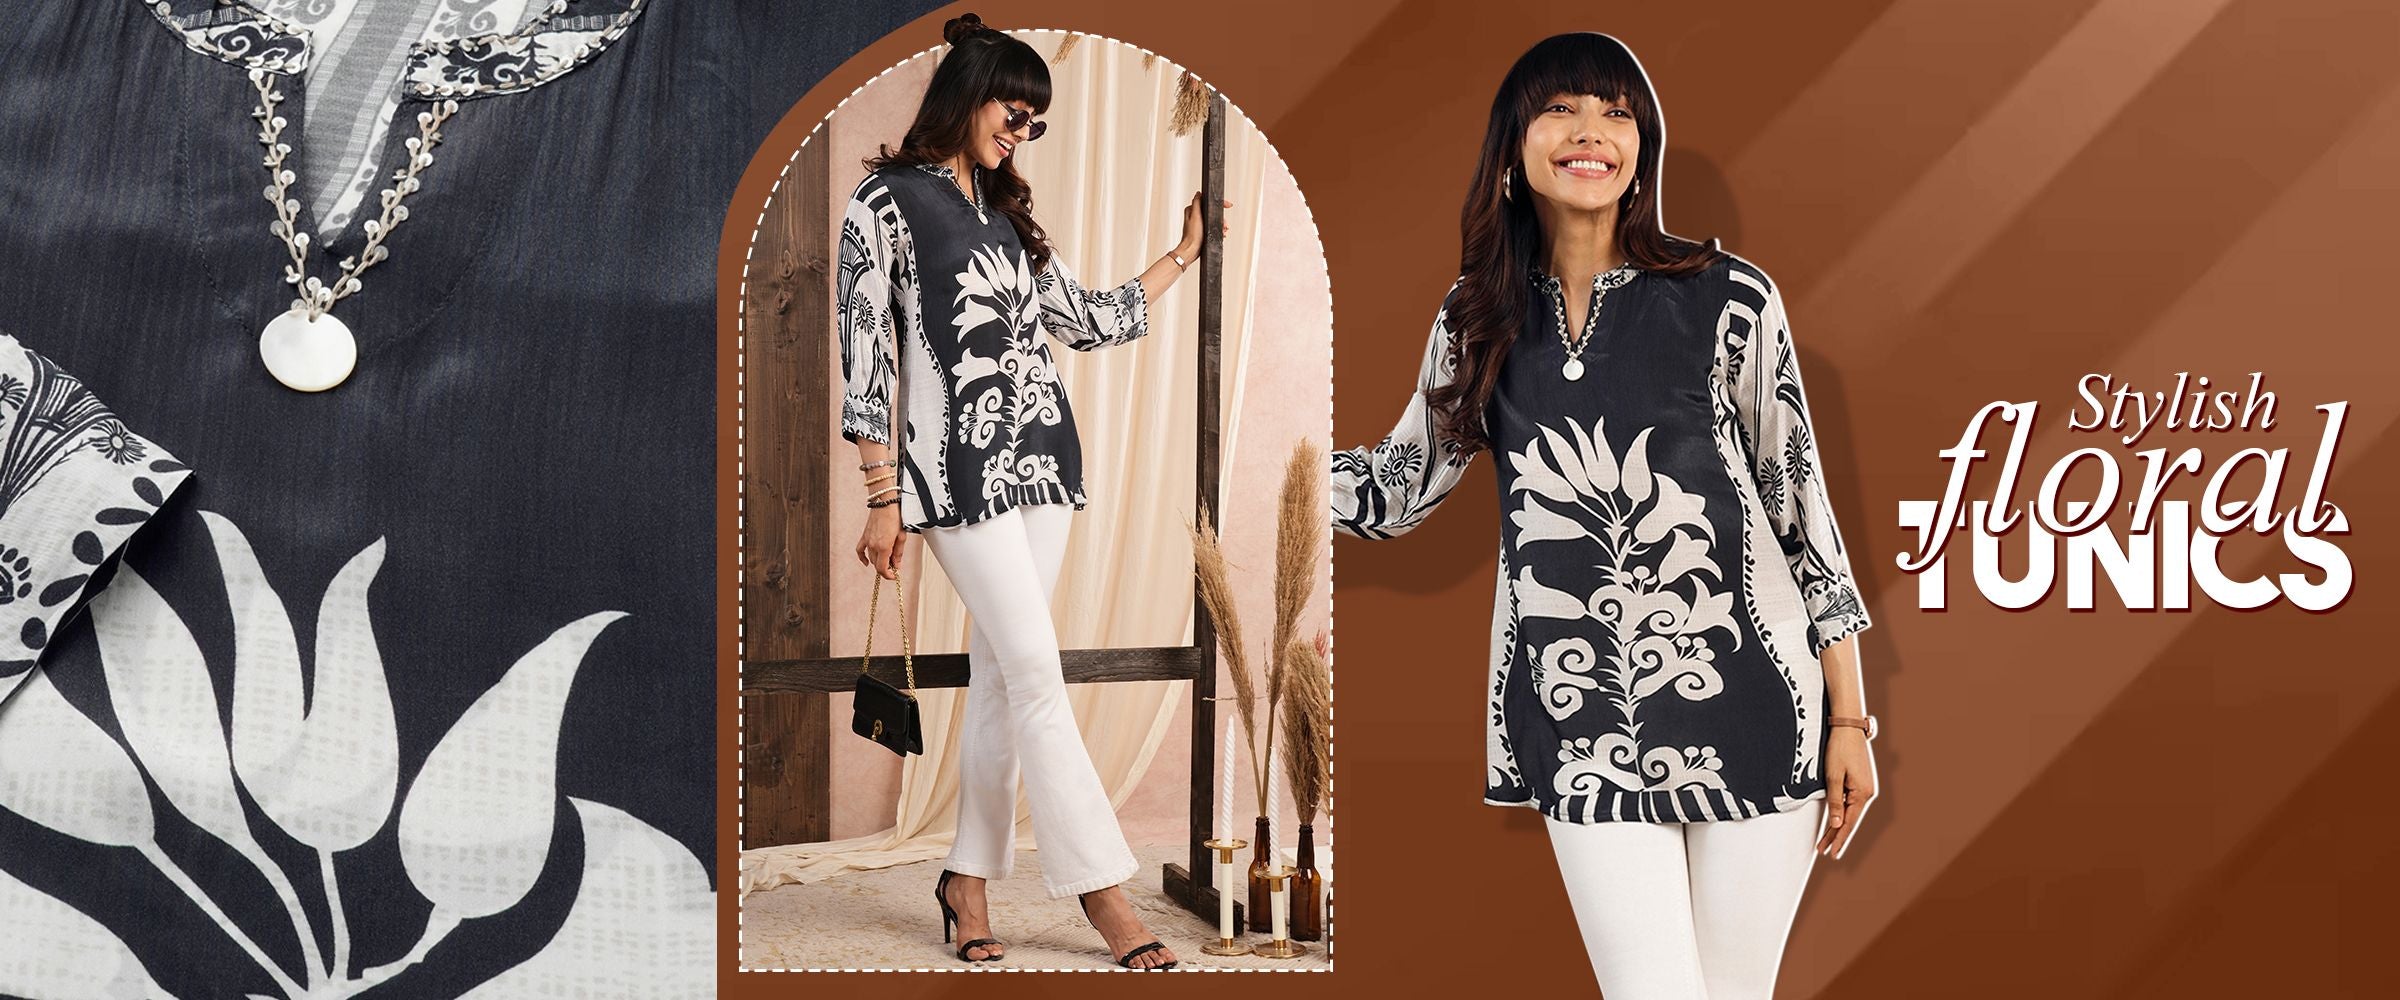 Floral Tunics: Stylish Comfort for Every Woman